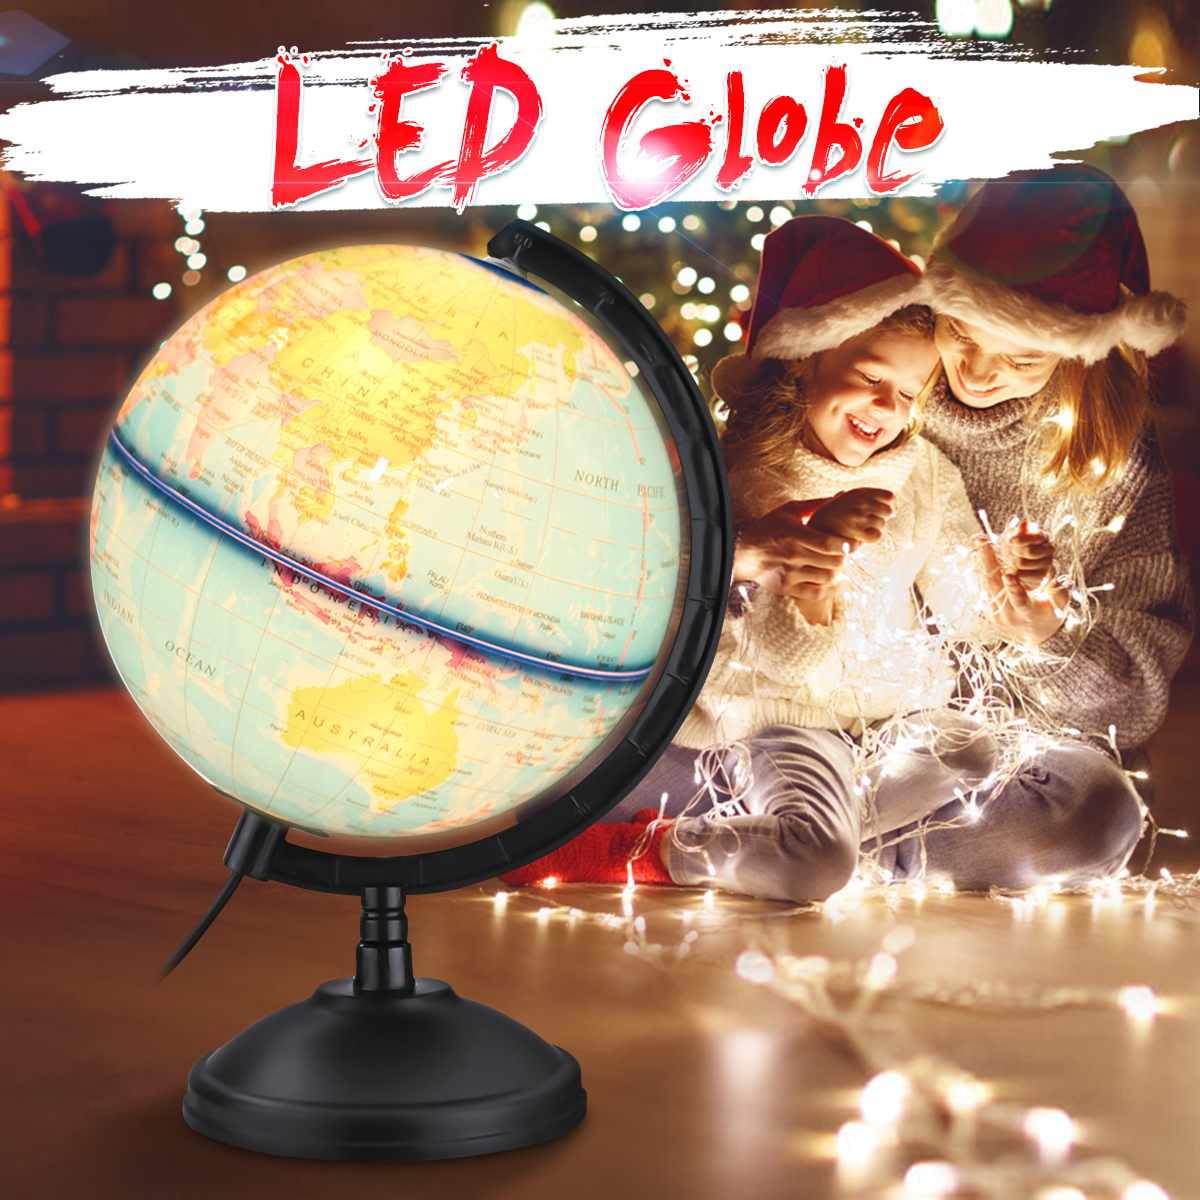 LED World Earth Globe Map Geography Education Kid Gift Rotating Stand Desk 